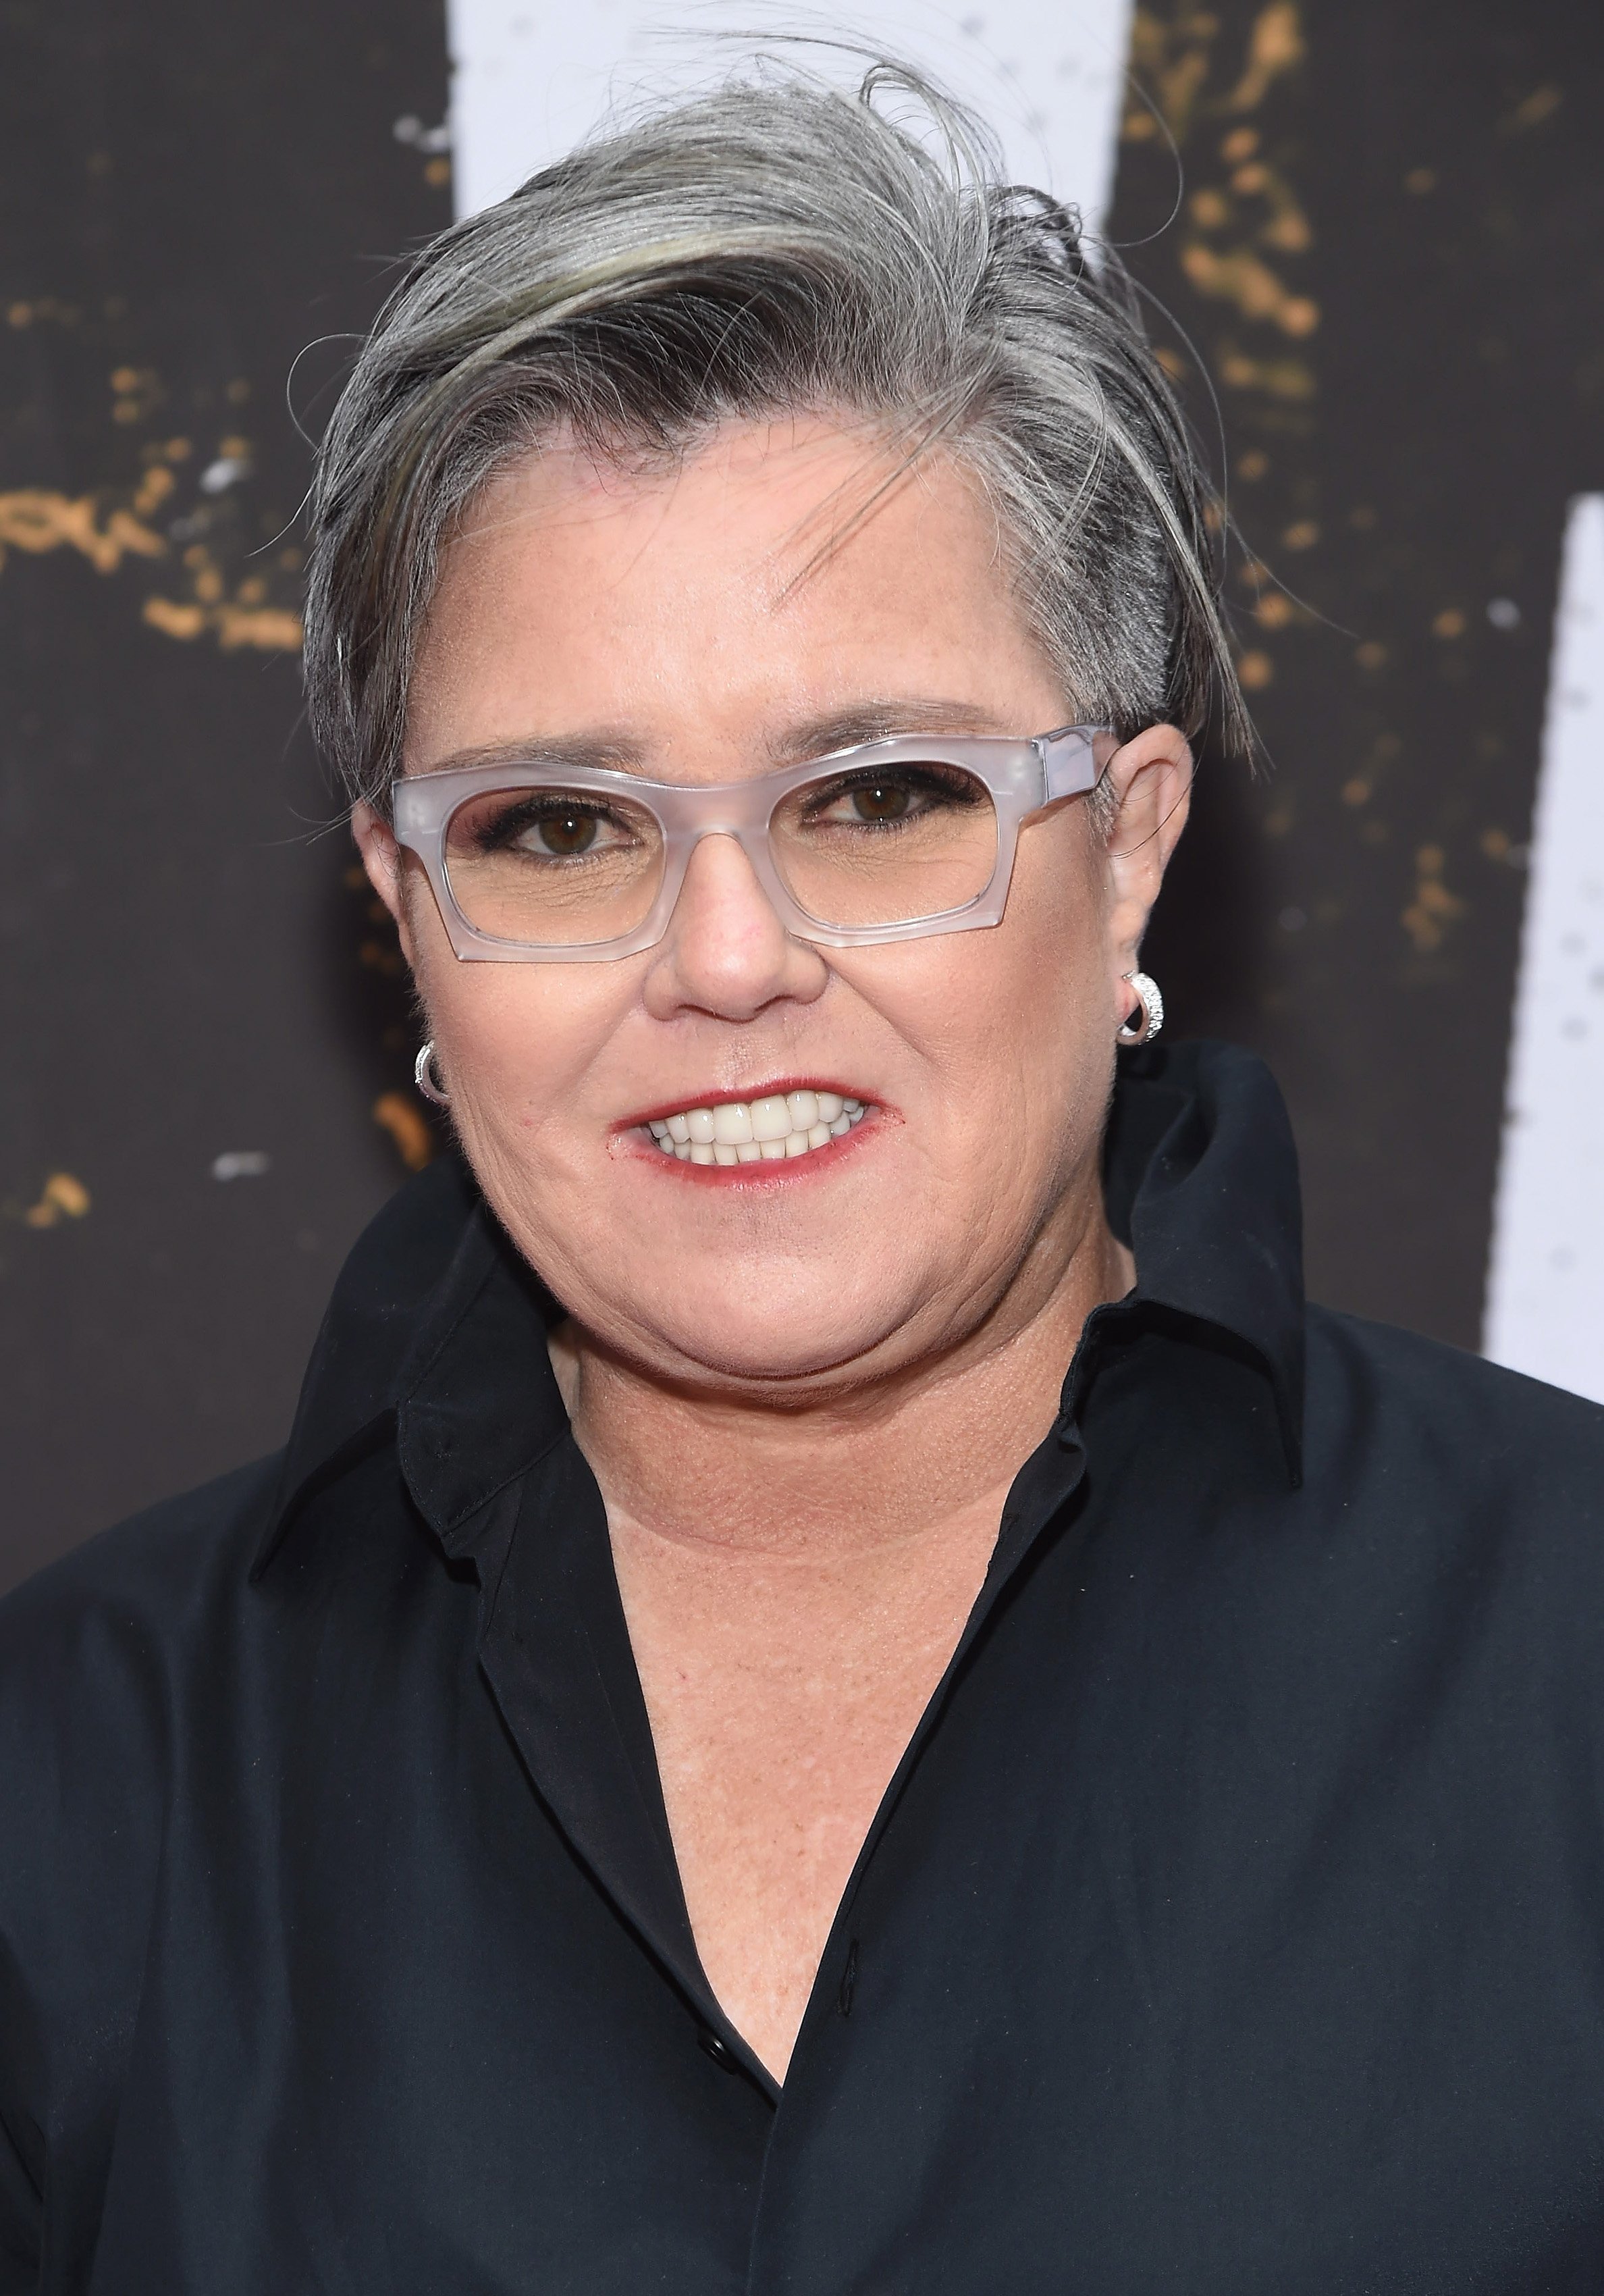 Rosie O'Donnell attends the Broadway opening night of 'Oklahoma' on April 07, 2019, in New York City. | Source: Getty Images.